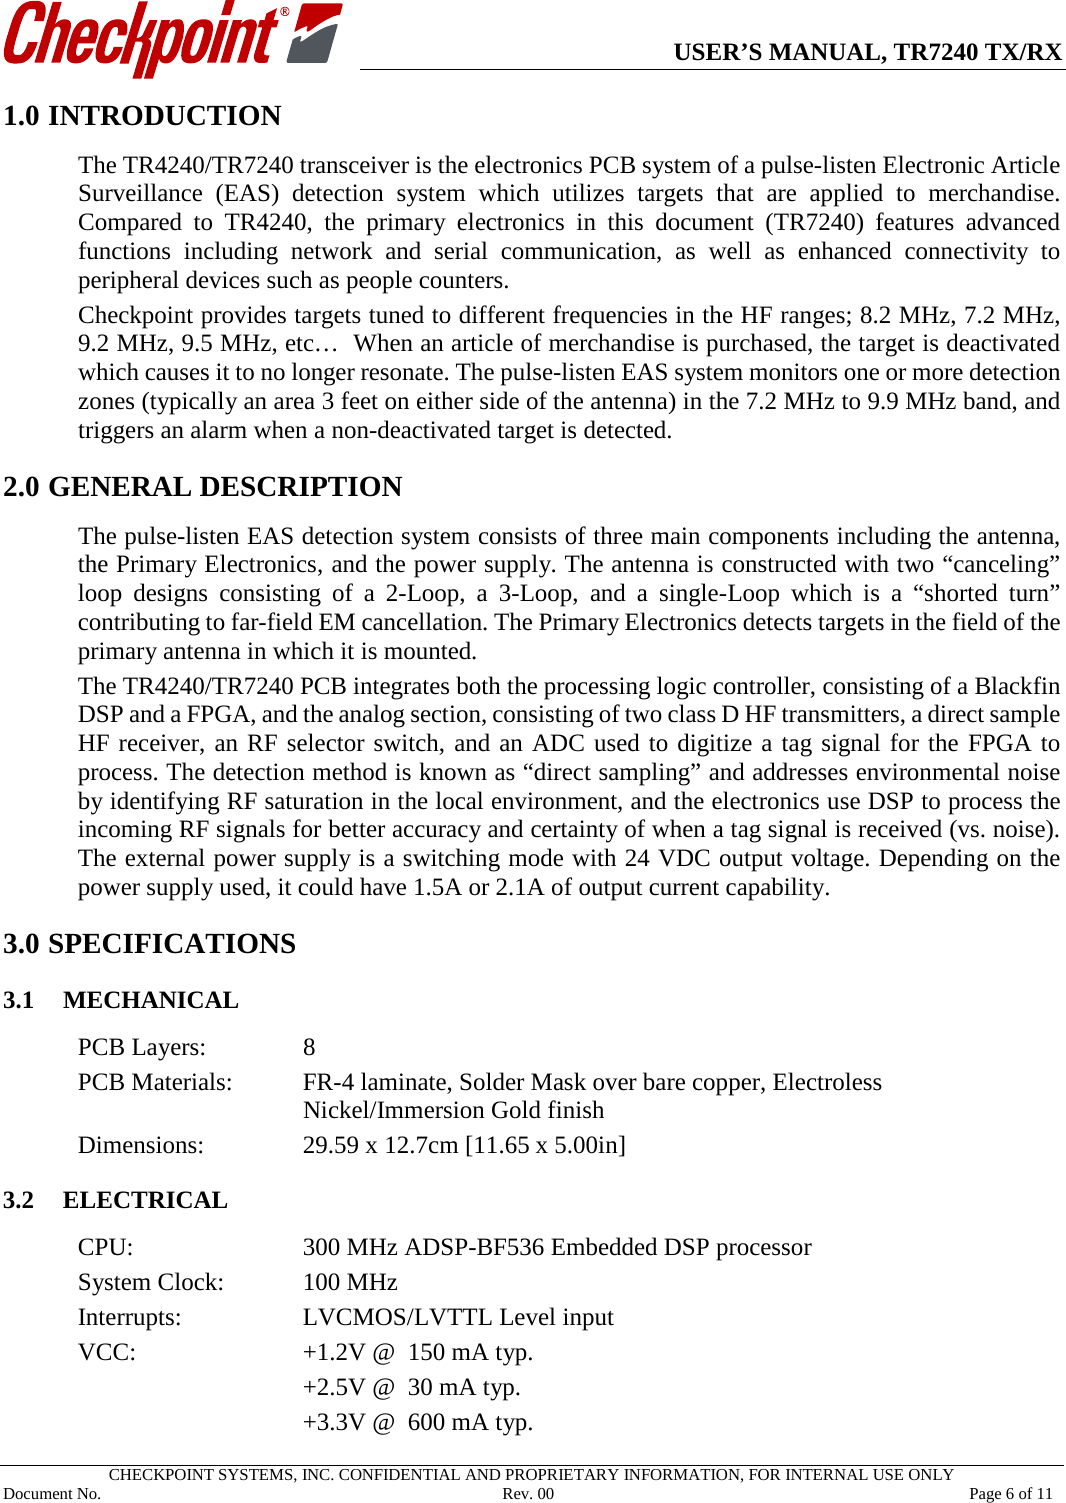      USER’S MANUAL, TR7240 TX/RX   CHECKPOINT SYSTEMS, INC. CONFIDENTIAL AND PROPRIETARY INFORMATION, FOR INTERNAL USE ONLY Document No.     Rev. 00 Page 6 of 11 1.0 INTRODUCTION The TR4240/TR7240 transceiver is the electronics PCB system of a pulse-listen Electronic Article Surveillance (EAS) detection system which utilizes targets that are applied to merchandise. Compared to TR4240, the primary electronics in this document (TR7240)  features advanced functions including network and serial communication, as well as enhanced connectivity to peripheral devices such as people counters.   Checkpoint provides targets tuned to different frequencies in the HF ranges; 8.2 MHz, 7.2 MHz, 9.2 MHz, 9.5 MHz, etc…  When an article of merchandise is purchased, the target is deactivated which causes it to no longer resonate. The pulse-listen EAS system monitors one or more detection zones (typically an area 3 feet on either side of the antenna) in the 7.2 MHz to 9.9 MHz band, and triggers an alarm when a non-deactivated target is detected. 2.0 1GENERAL DESCRIPTION The pulse-listen EAS detection system consists of three main components including the antenna, the Primary Electronics, and the power supply. The antenna is constructed with two “canceling” loop designs consisting of a 2-Loop, a 3-Loop,  and a single-Loop which is a “shorted turn” contributing to far-field EM cancellation. The Primary Electronics detects targets in the field of the primary antenna in which it is mounted. The TR4240/TR7240 PCB integrates both the processing logic controller, consisting of a Blackfin DSP and a FPGA, and the analog section, consisting of two class D HF transmitters, a direct sample HF receiver, an RF selector switch, and an ADC used to digitize a tag signal for the FPGA to process. The detection method is known as “direct sampling” and addresses environmental noise by identifying RF saturation in the local environment, and the electronics use DSP to process the incoming RF signals for better accuracy and certainty of when a tag signal is received (vs. noise). The external power supply is a switching mode with 24 VDC output voltage. Depending on the power supply used, it could have 1.5A or 2.1A of output current capability. 3.0 SPECIFICATIONS 3.1 MECHANICAL PCB Layers:    8 PCB Materials:   FR-4 laminate, Solder Mask over bare copper, Electroless Nickel/Immersion Gold finish Dimensions:    29.59 x 12.7cm [11.65 x 5.00in]  3.2 ELECTRICAL CPU:   300 MHz ADSP-BF536 Embedded DSP processor System Clock:   100 MHz Interrupts:    LVCMOS/LVTTL Level input VCC:      +1.2V @  150 mA typ.       +2.5V @  30 mA typ.       +3.3V @  600 mA typ. 